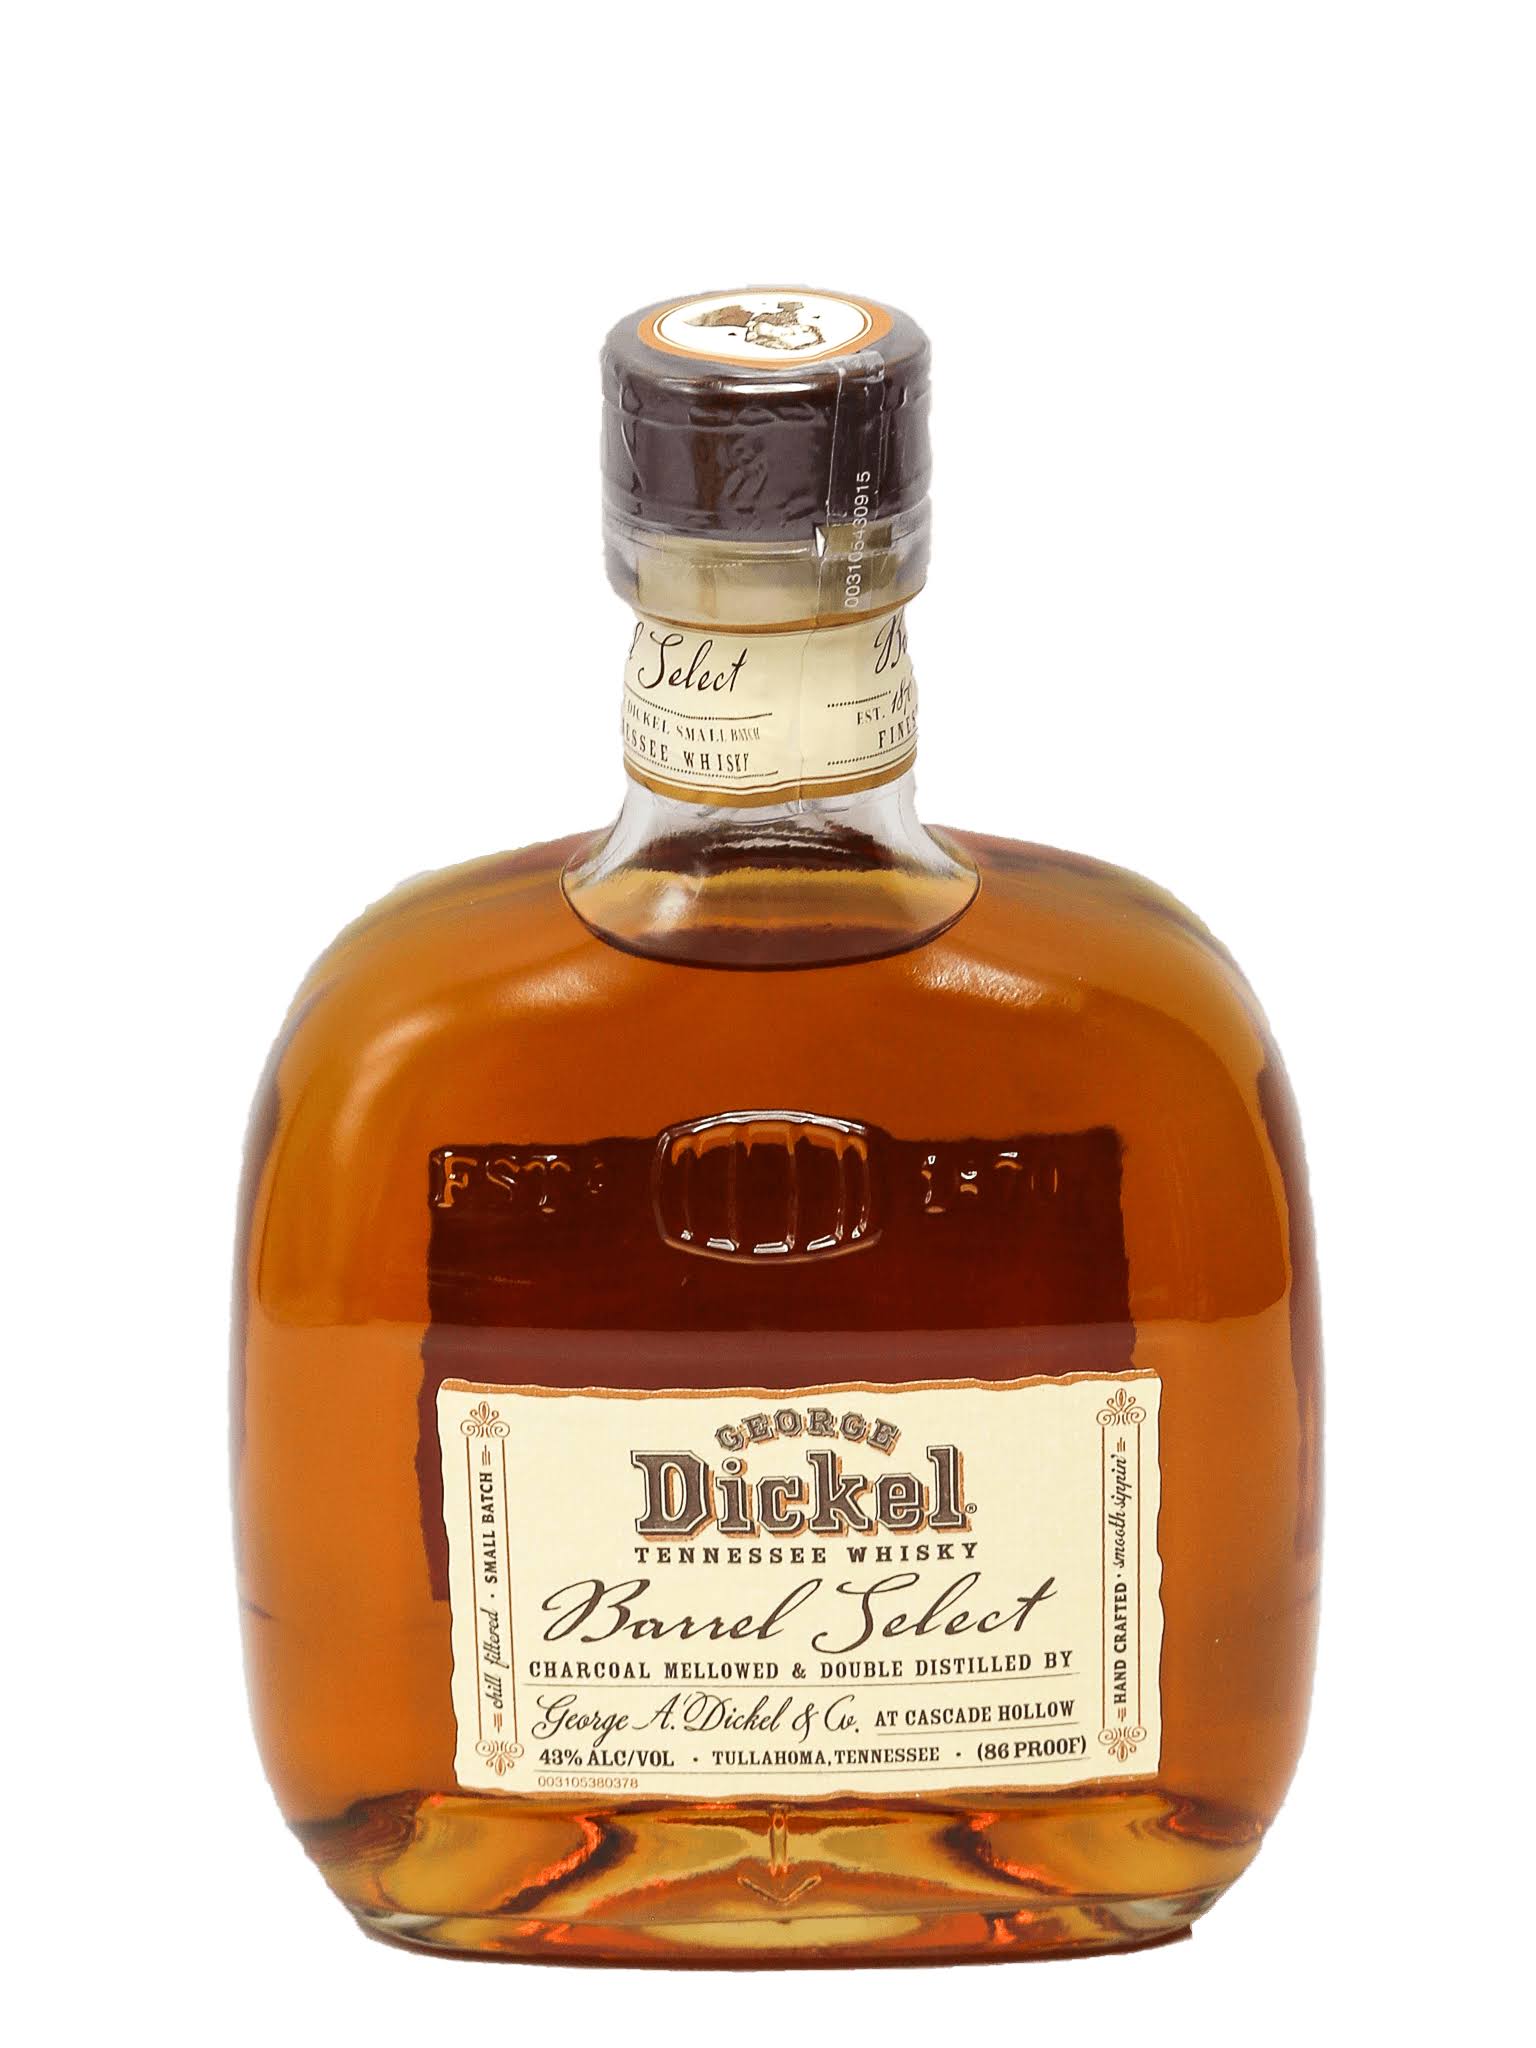 George Dickel Tennessee Whisky Barrel Select 750ml